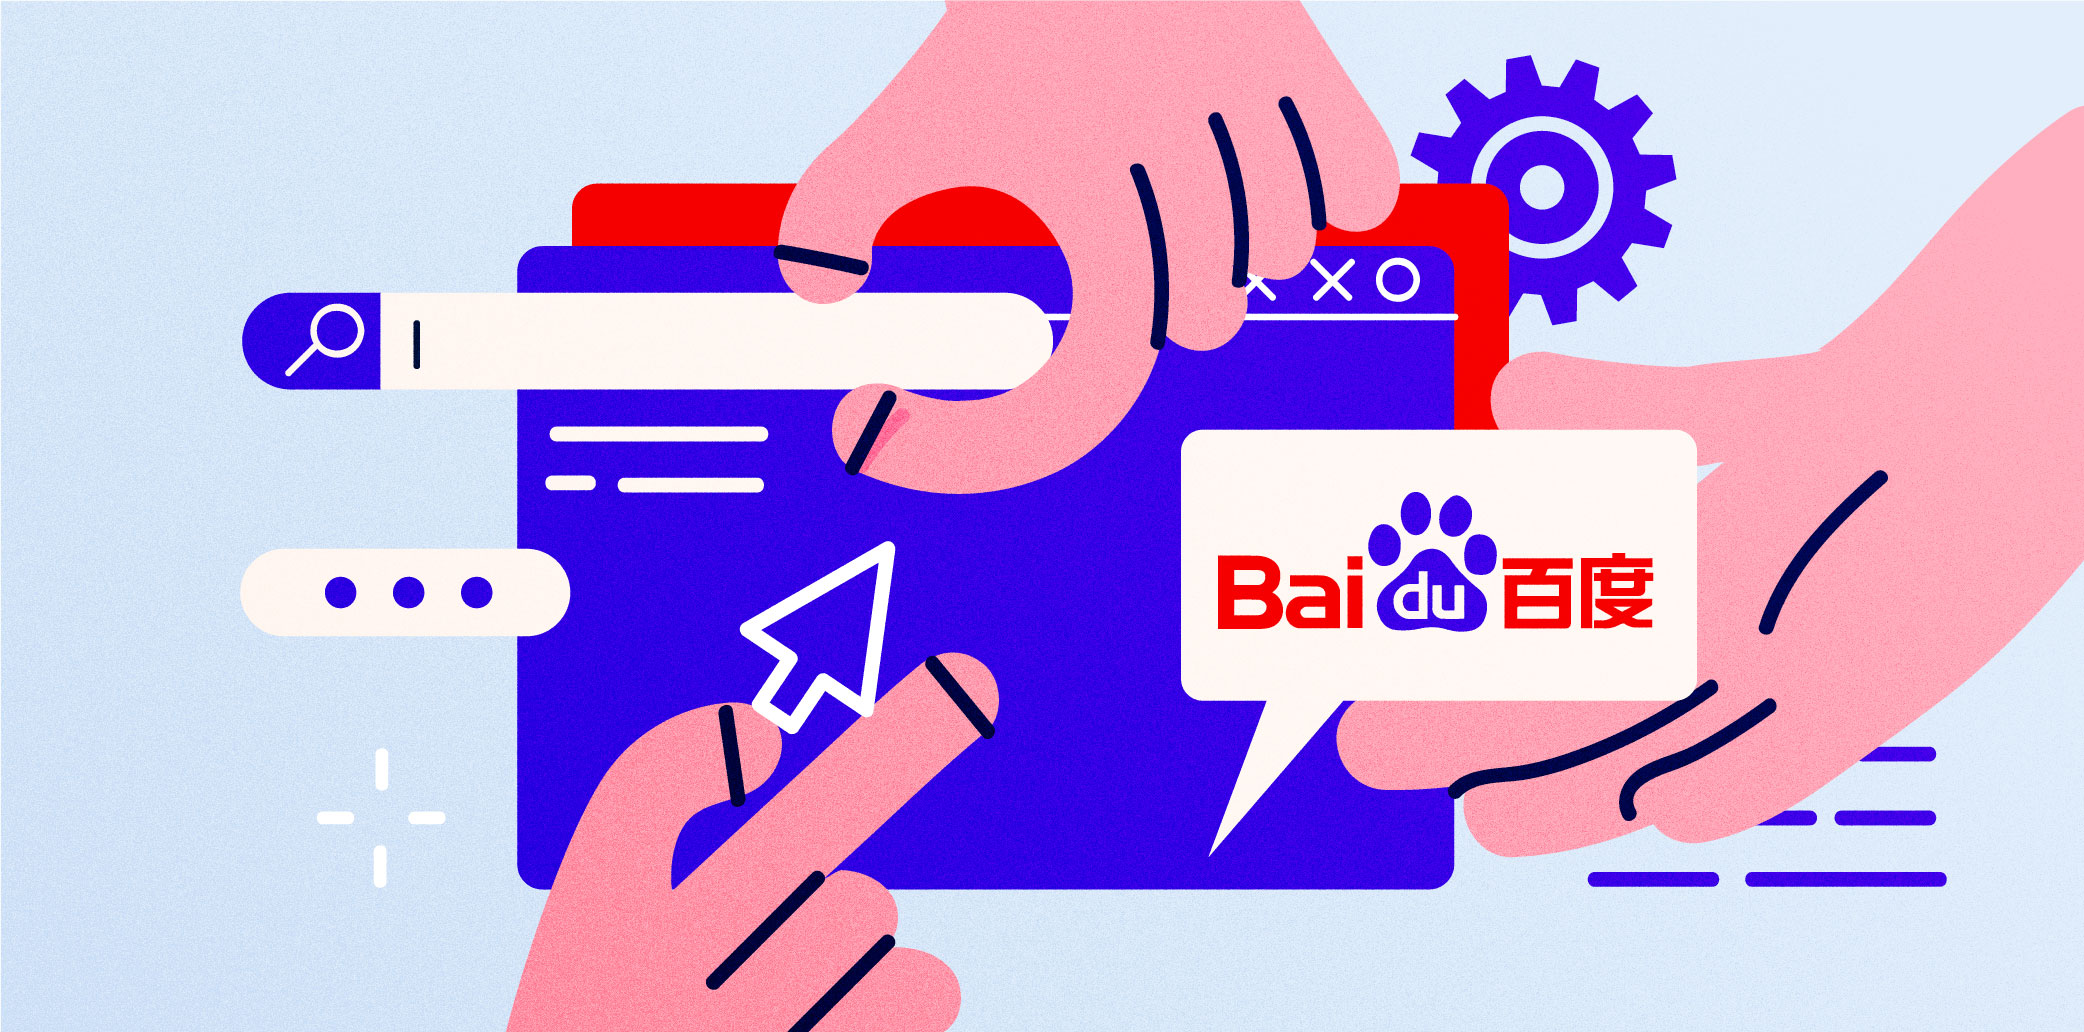 Baidu lays off up to 15% of core technical staff